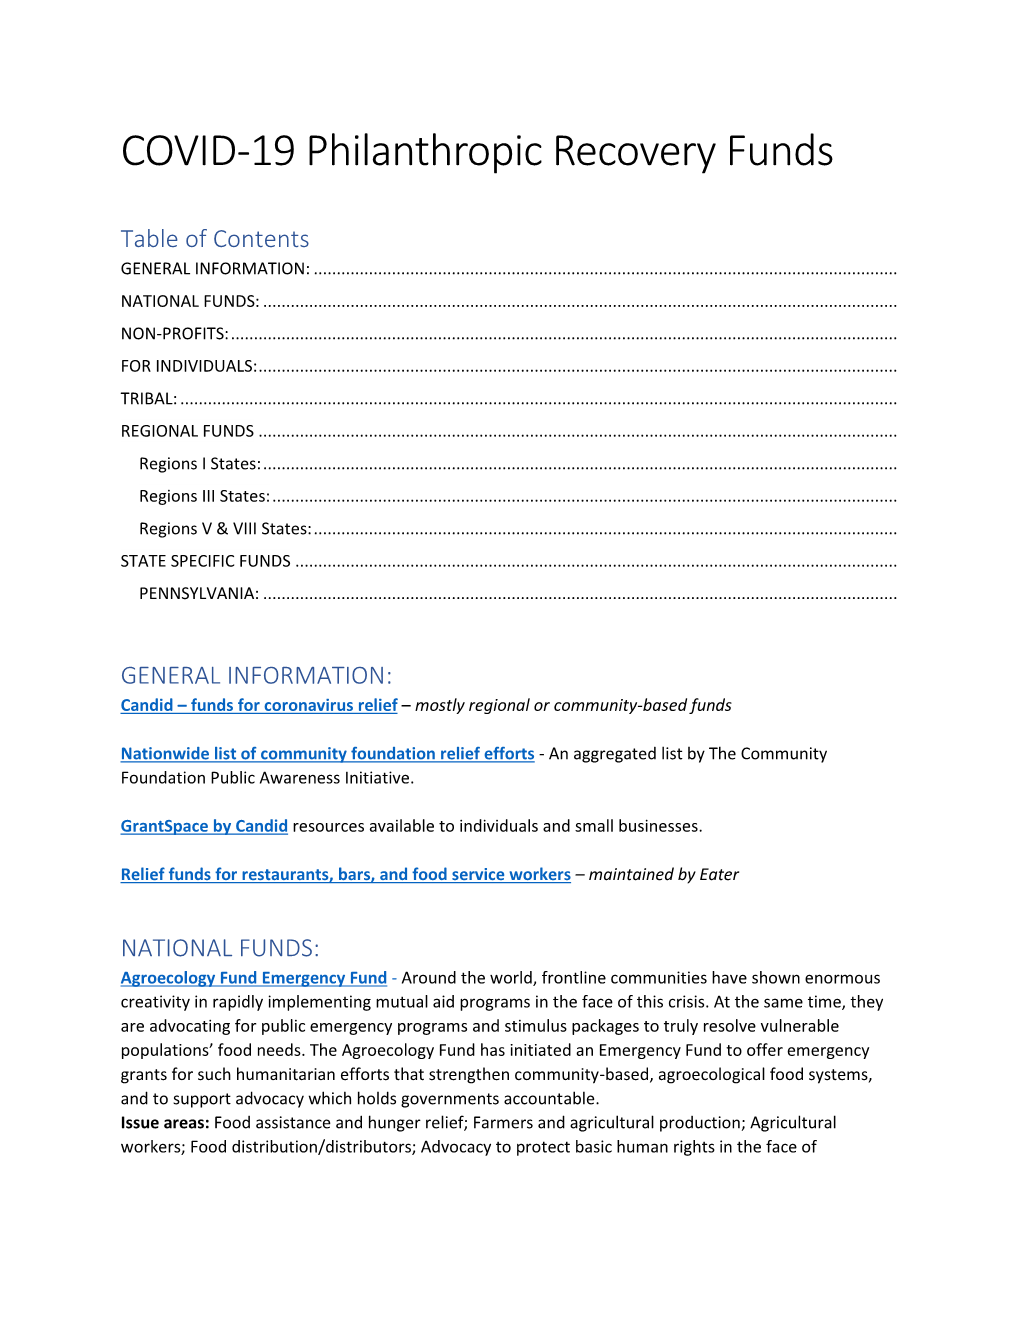 COVID-19 Philanthropic Recovery Funds